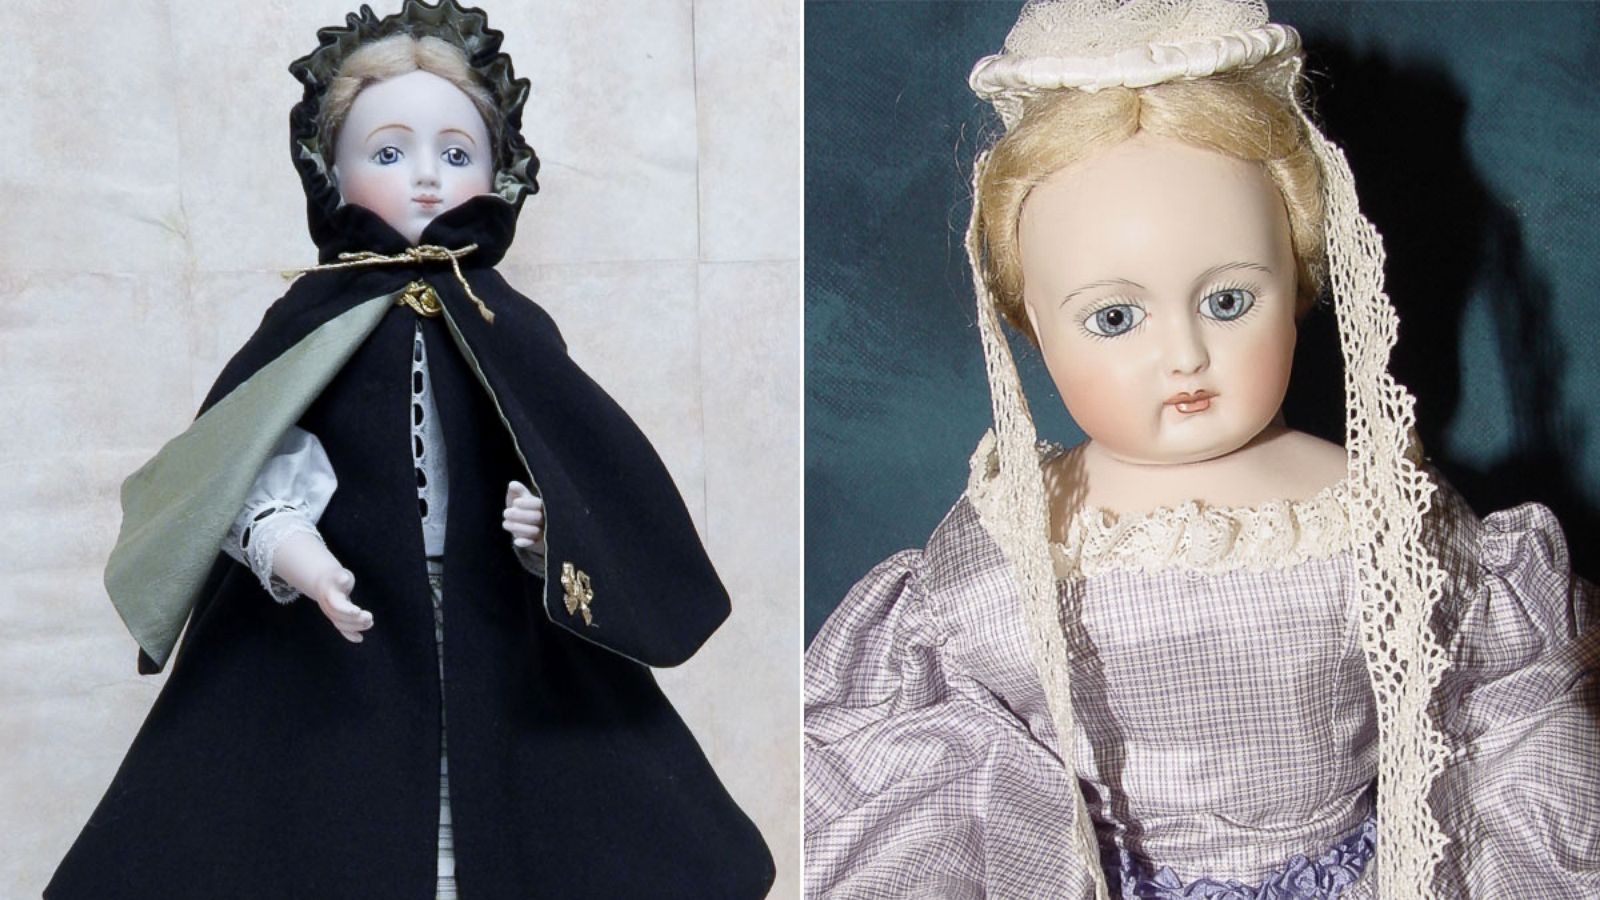 where can i sell my porcelain dolls near me